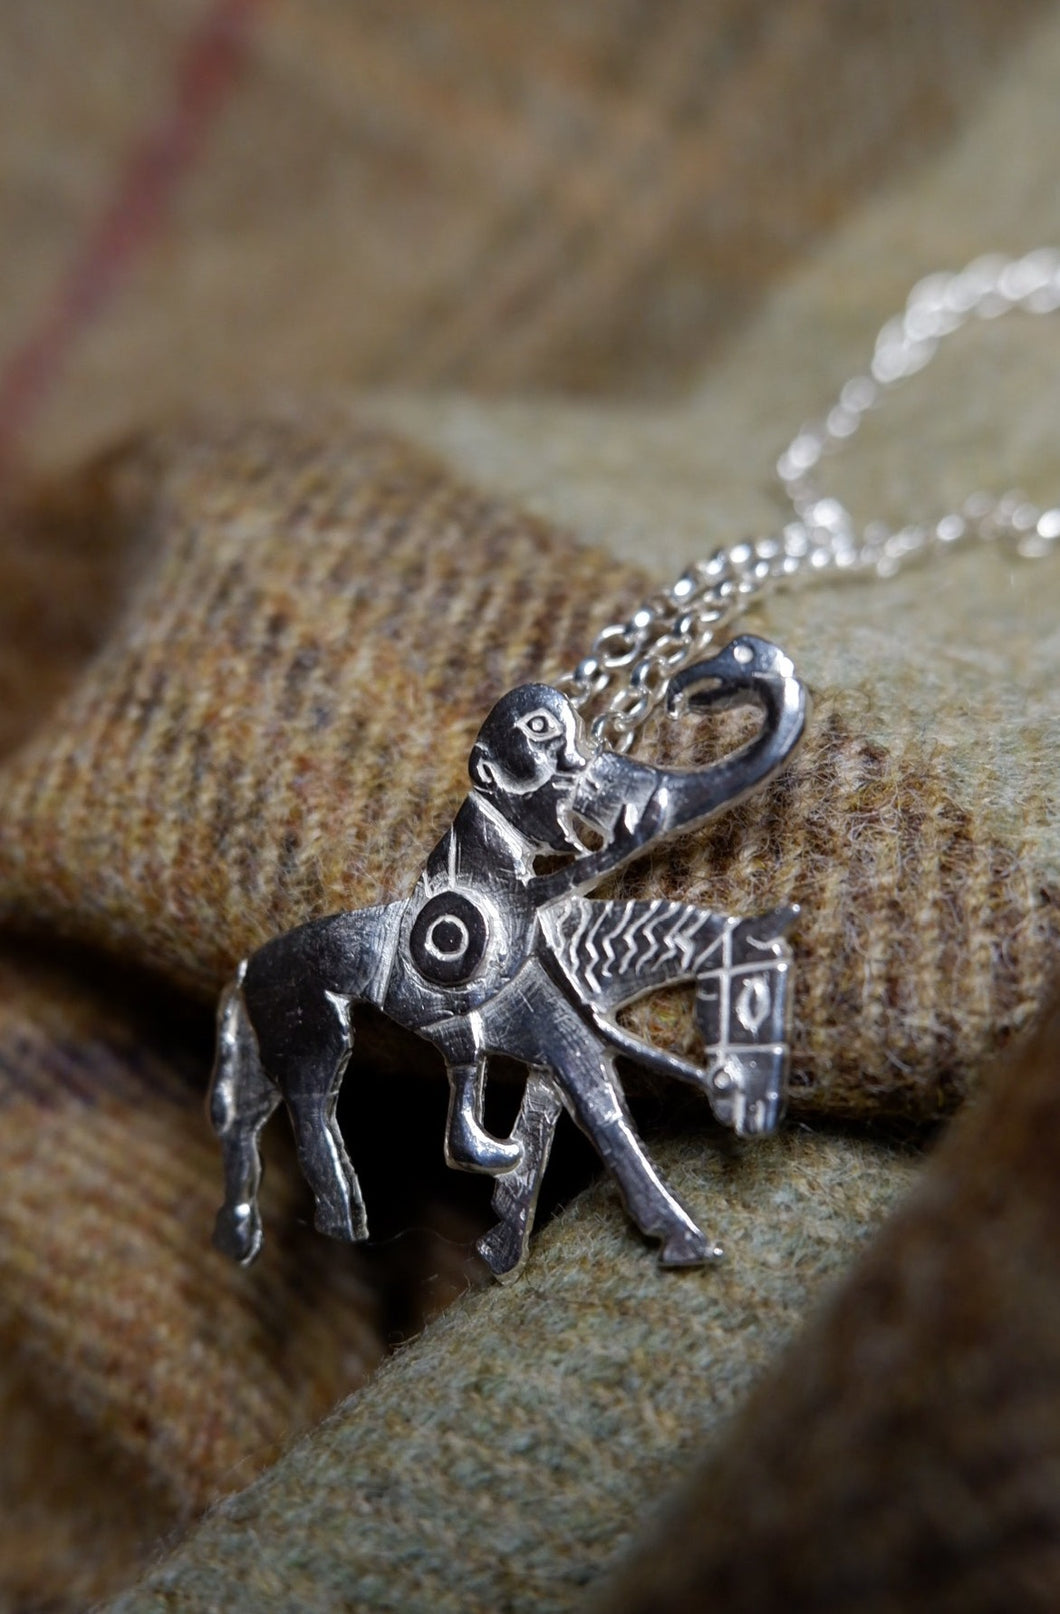 Pictish Man on a Horse Pendant in Sterling Silver - from the Bullion Stone